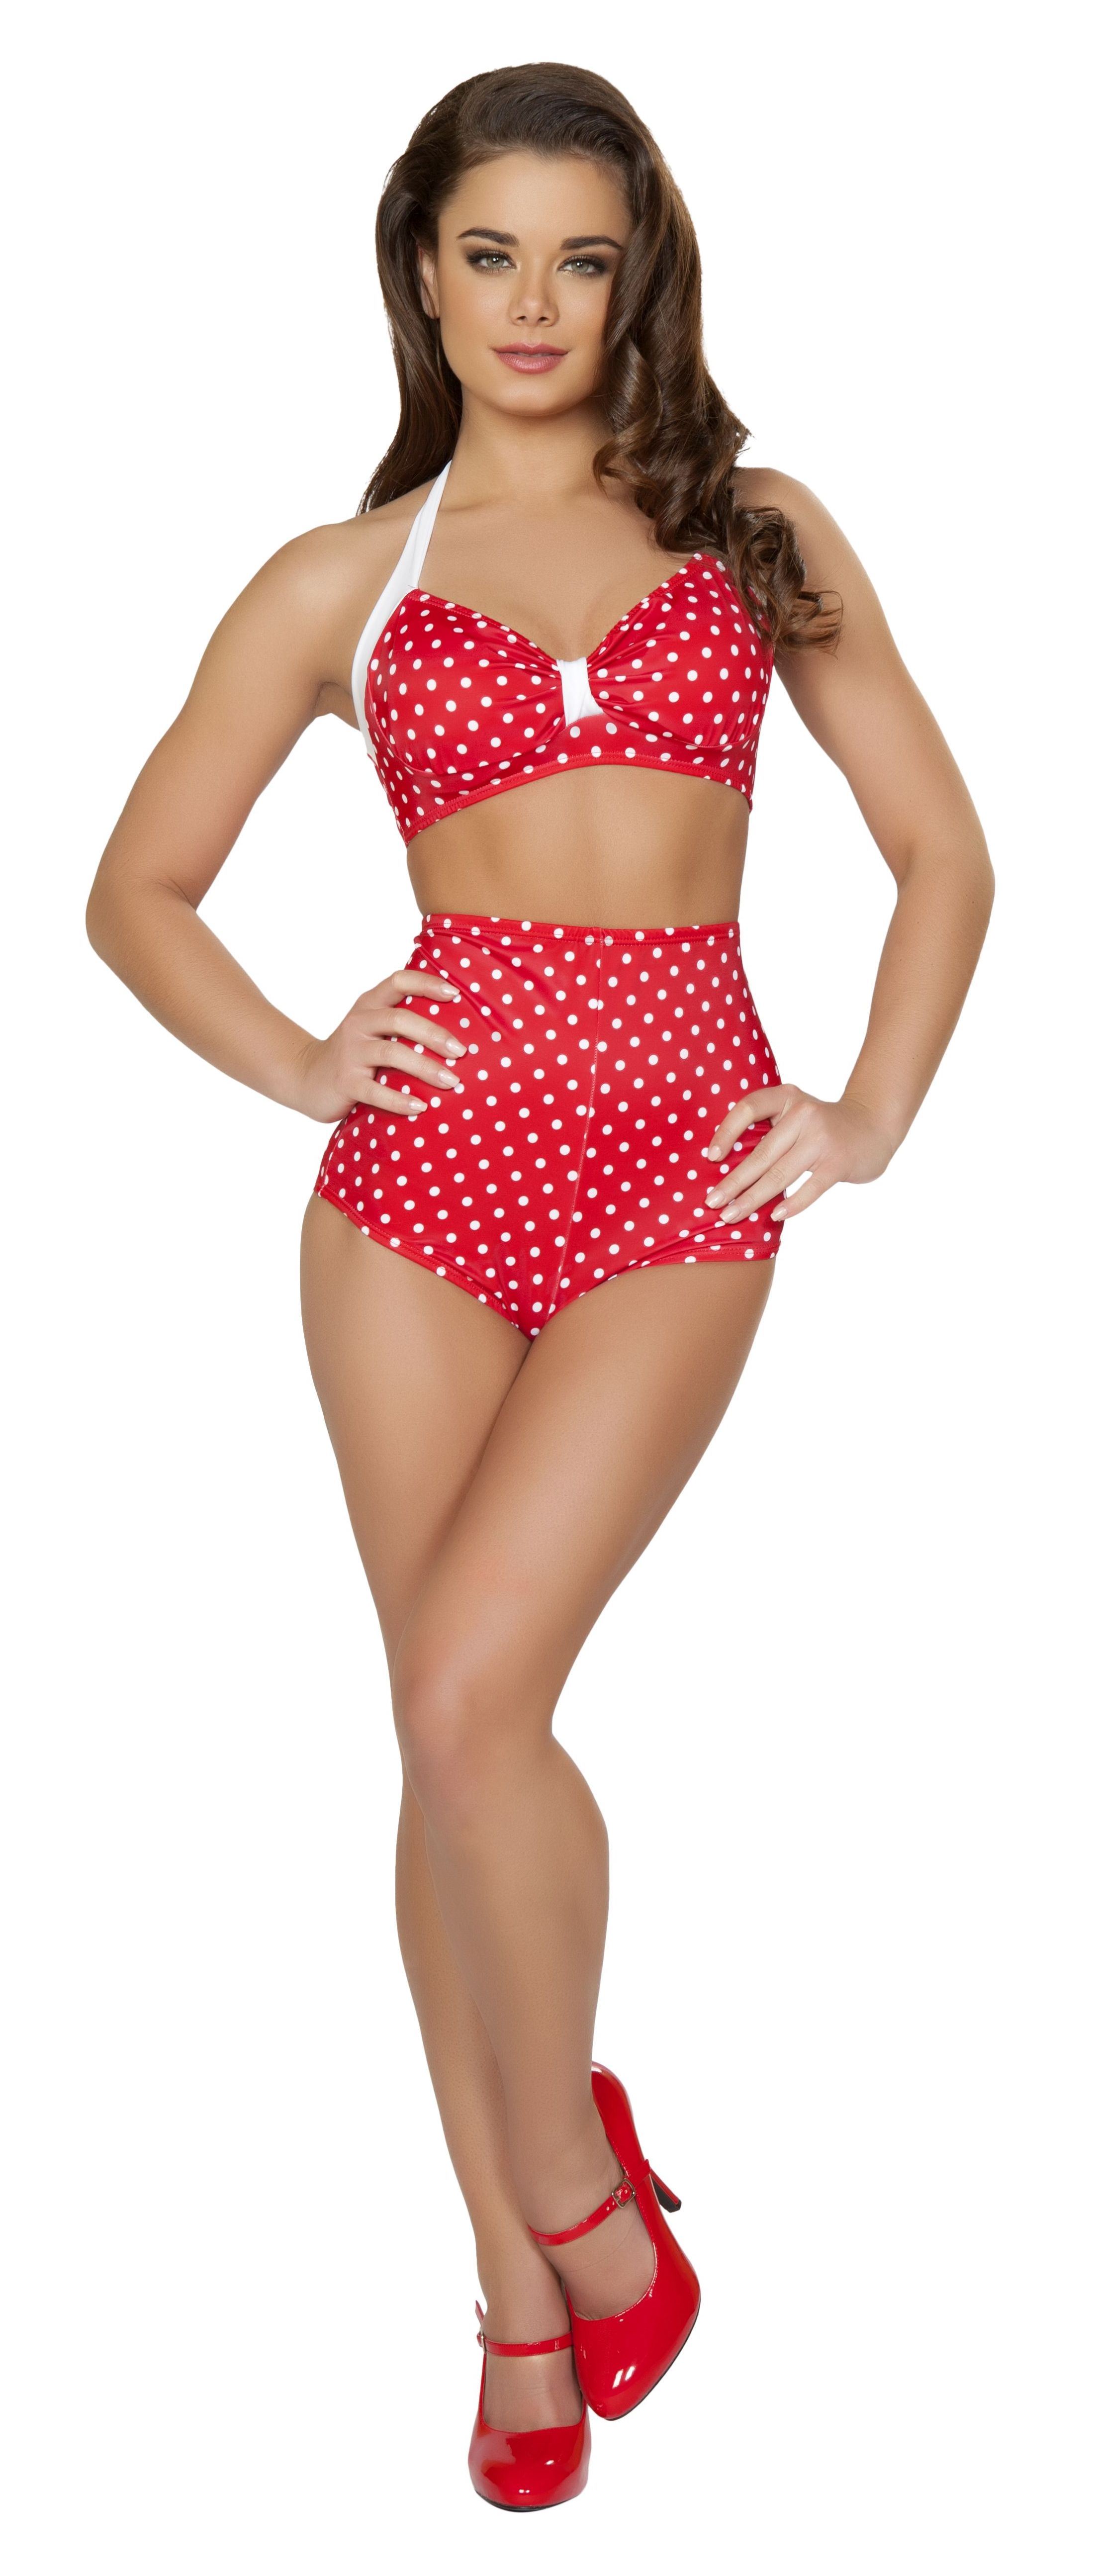 Adult Sexy Pin Up Halter Red And White Women Top 1999 The Costume